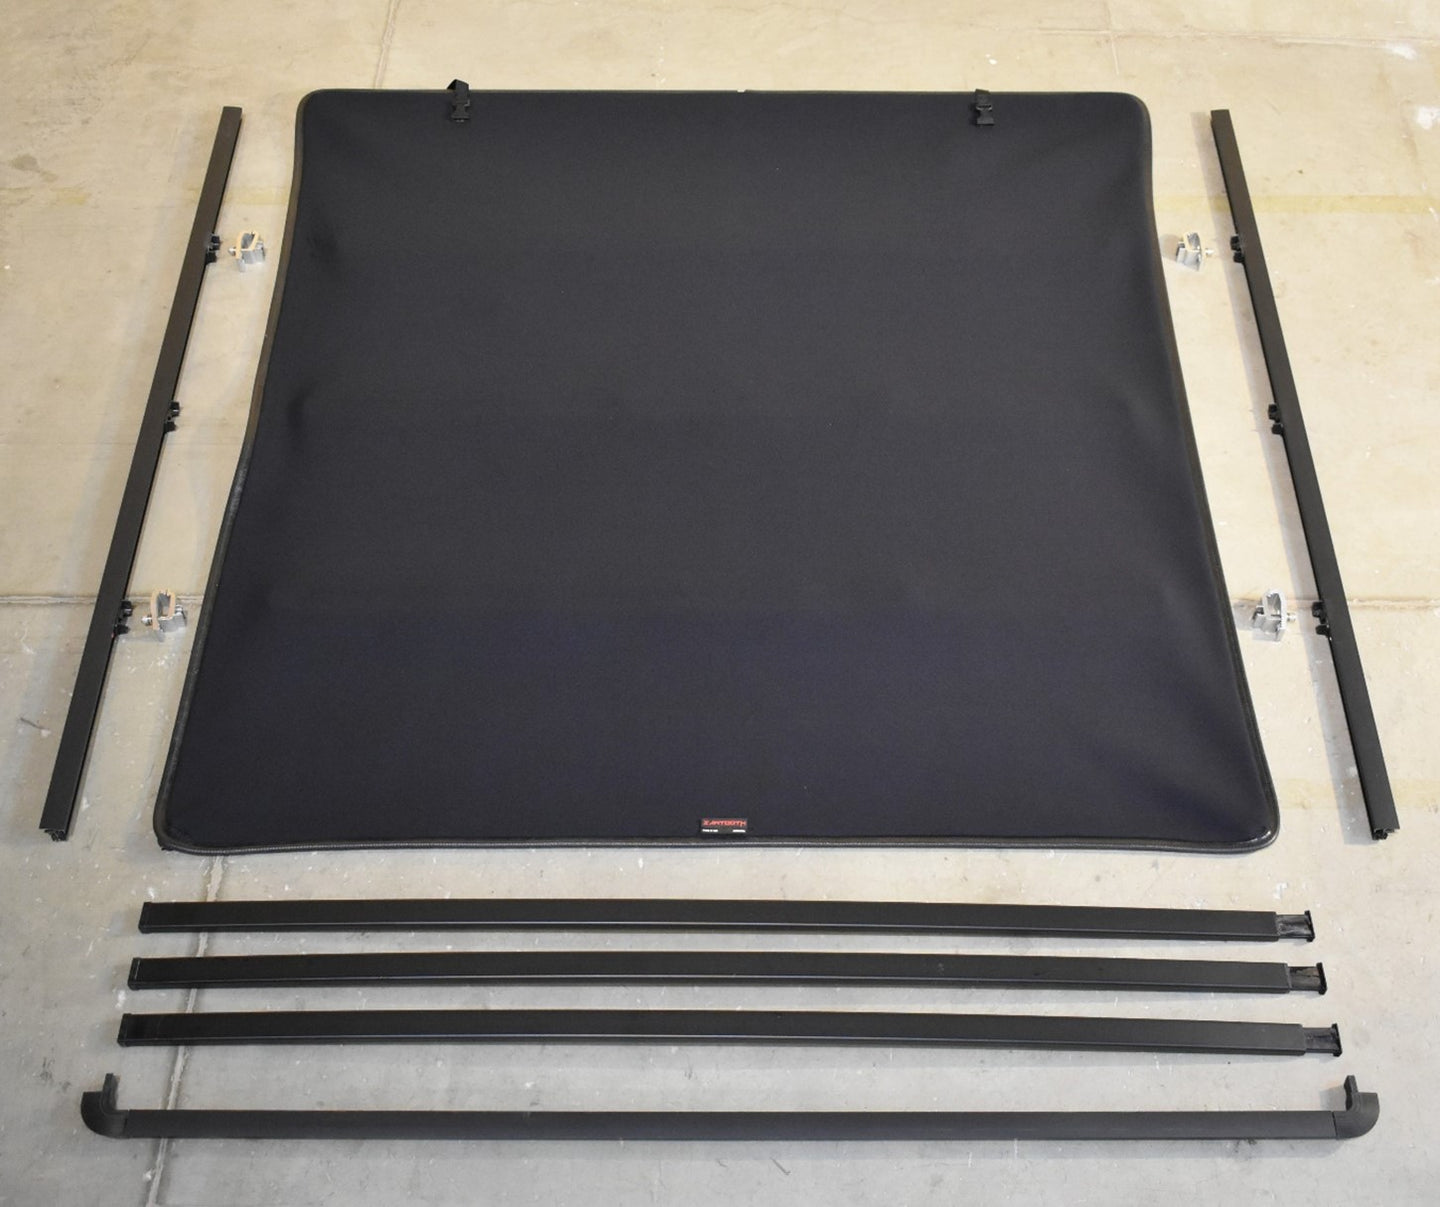 Ford Ranger Sawtooth expandable pickup truck bed components